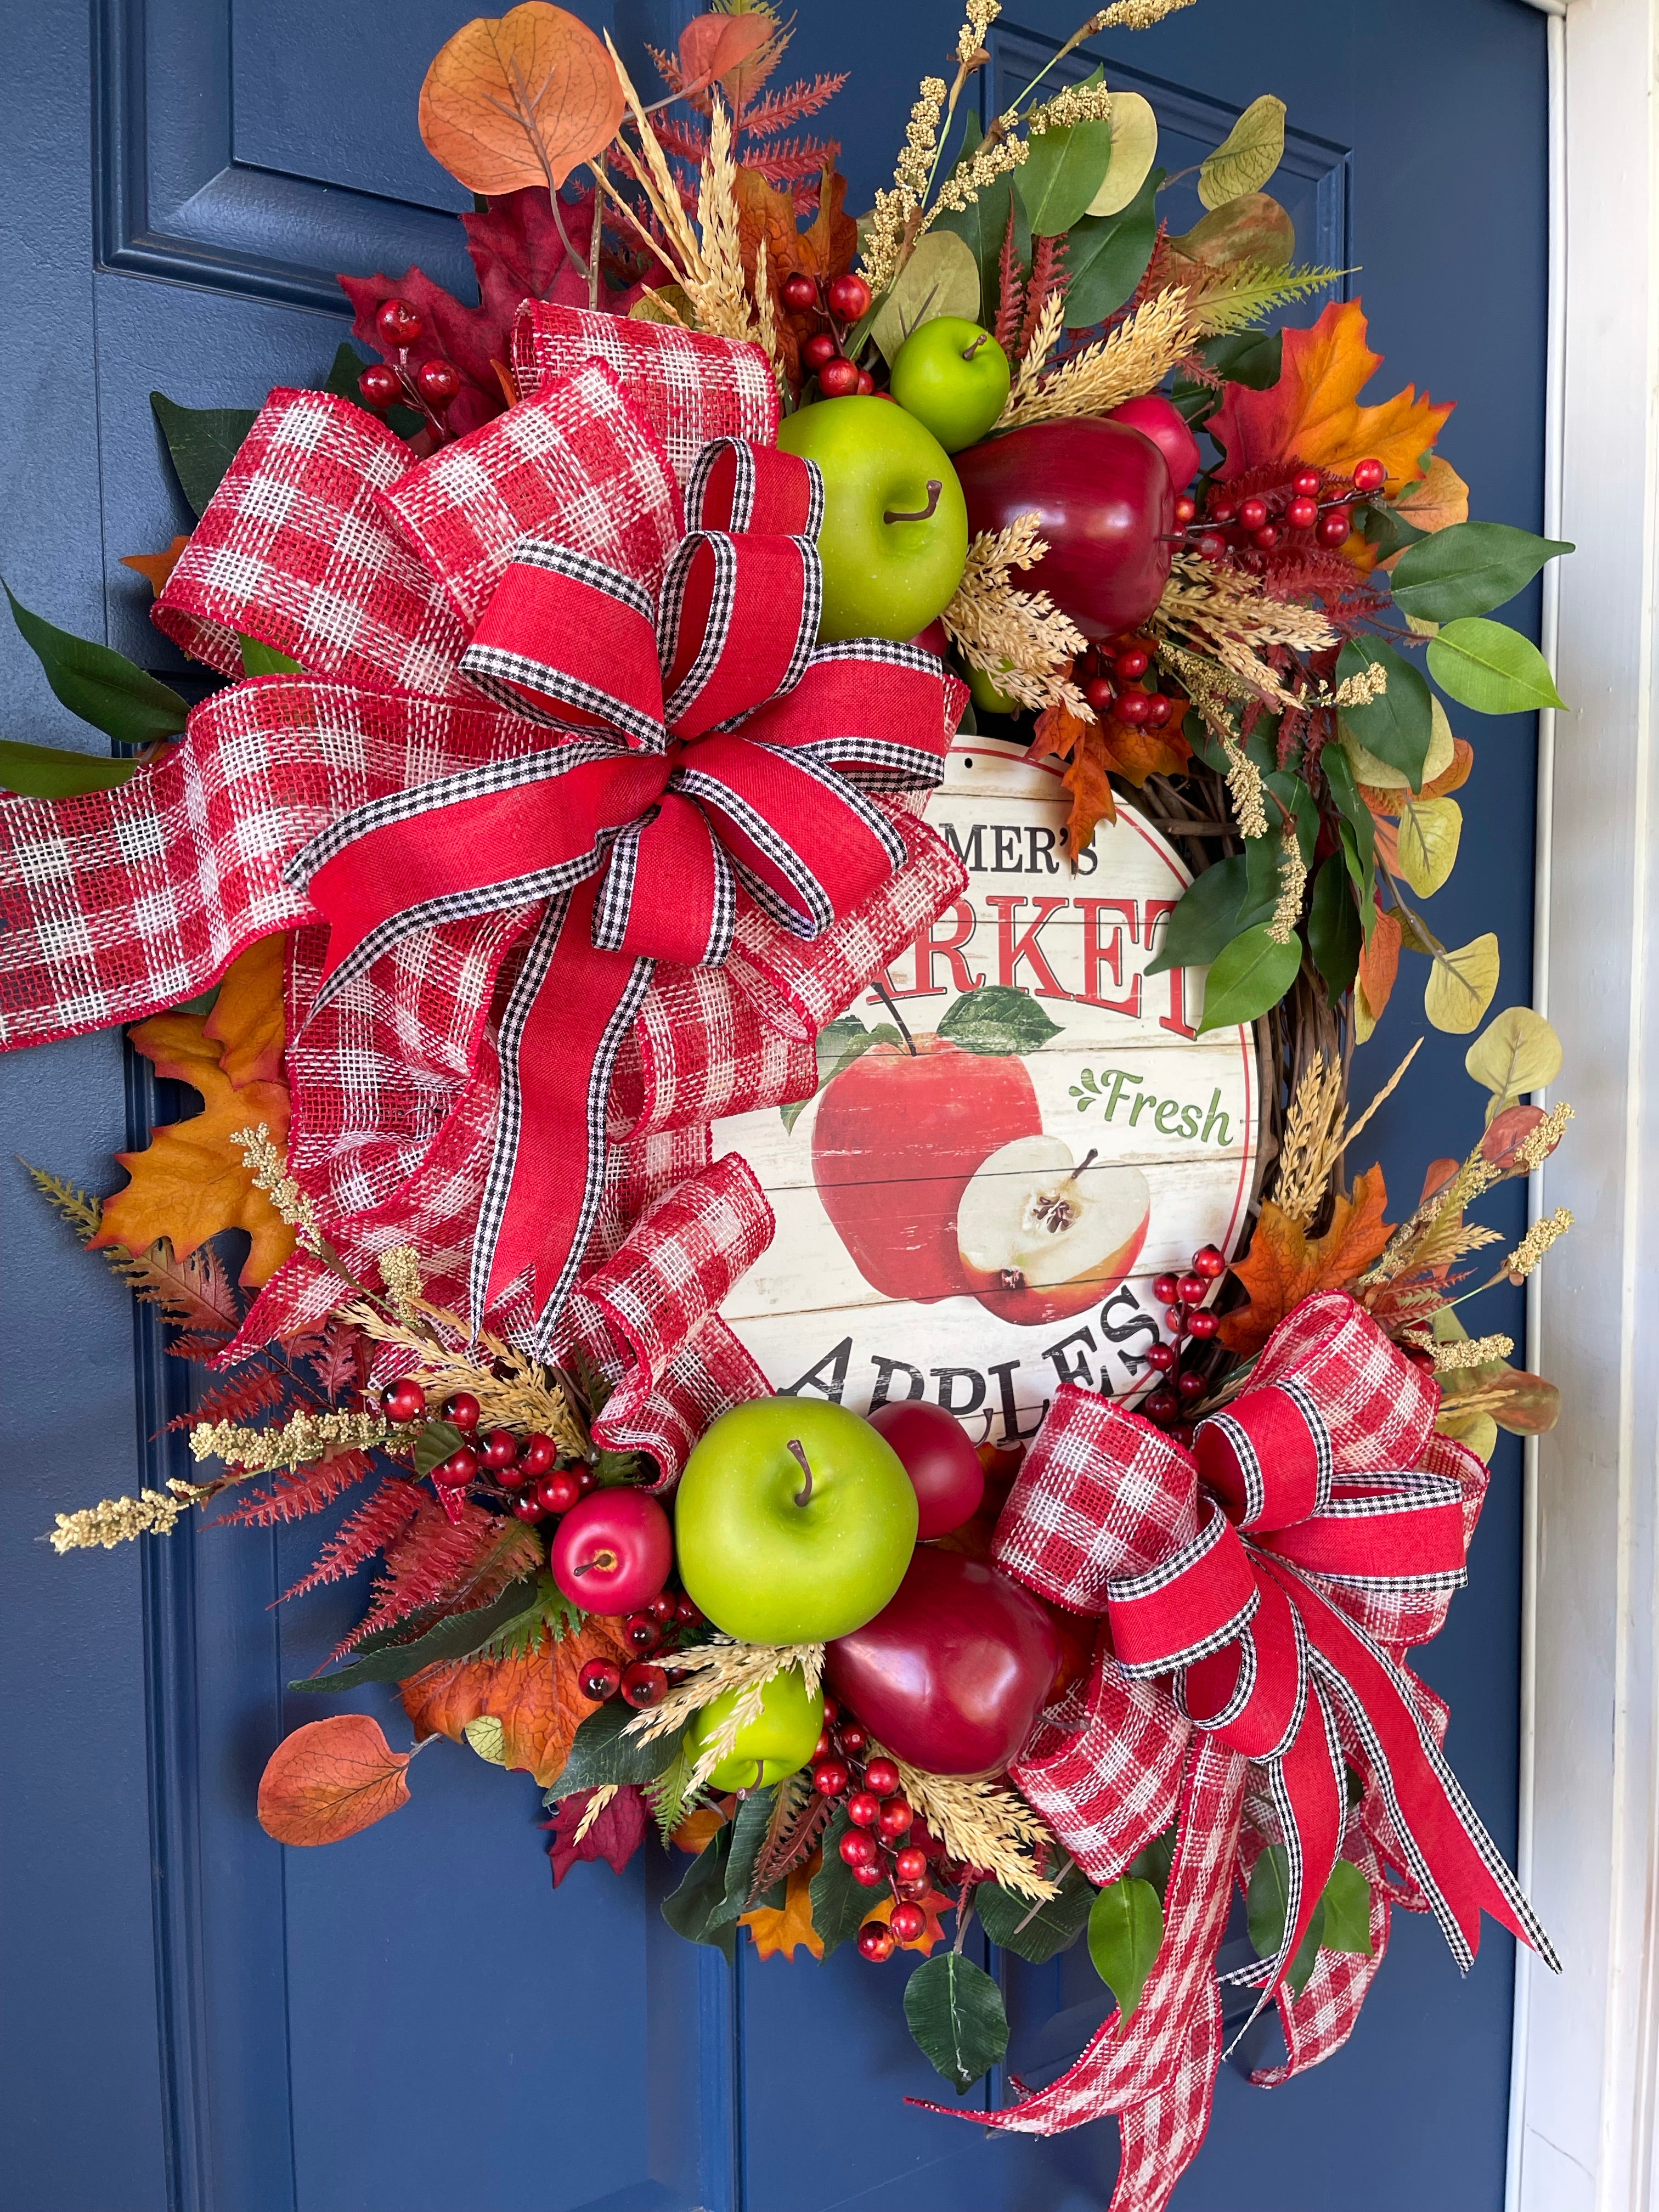 Left Side View of Fall Apple Grapevine Wreath filled with Red and Green Apples, Fall Leaves and Berries, Double Bows of Red, White and Black with a Farmers Market Fresh Apples Sign in the Center. 